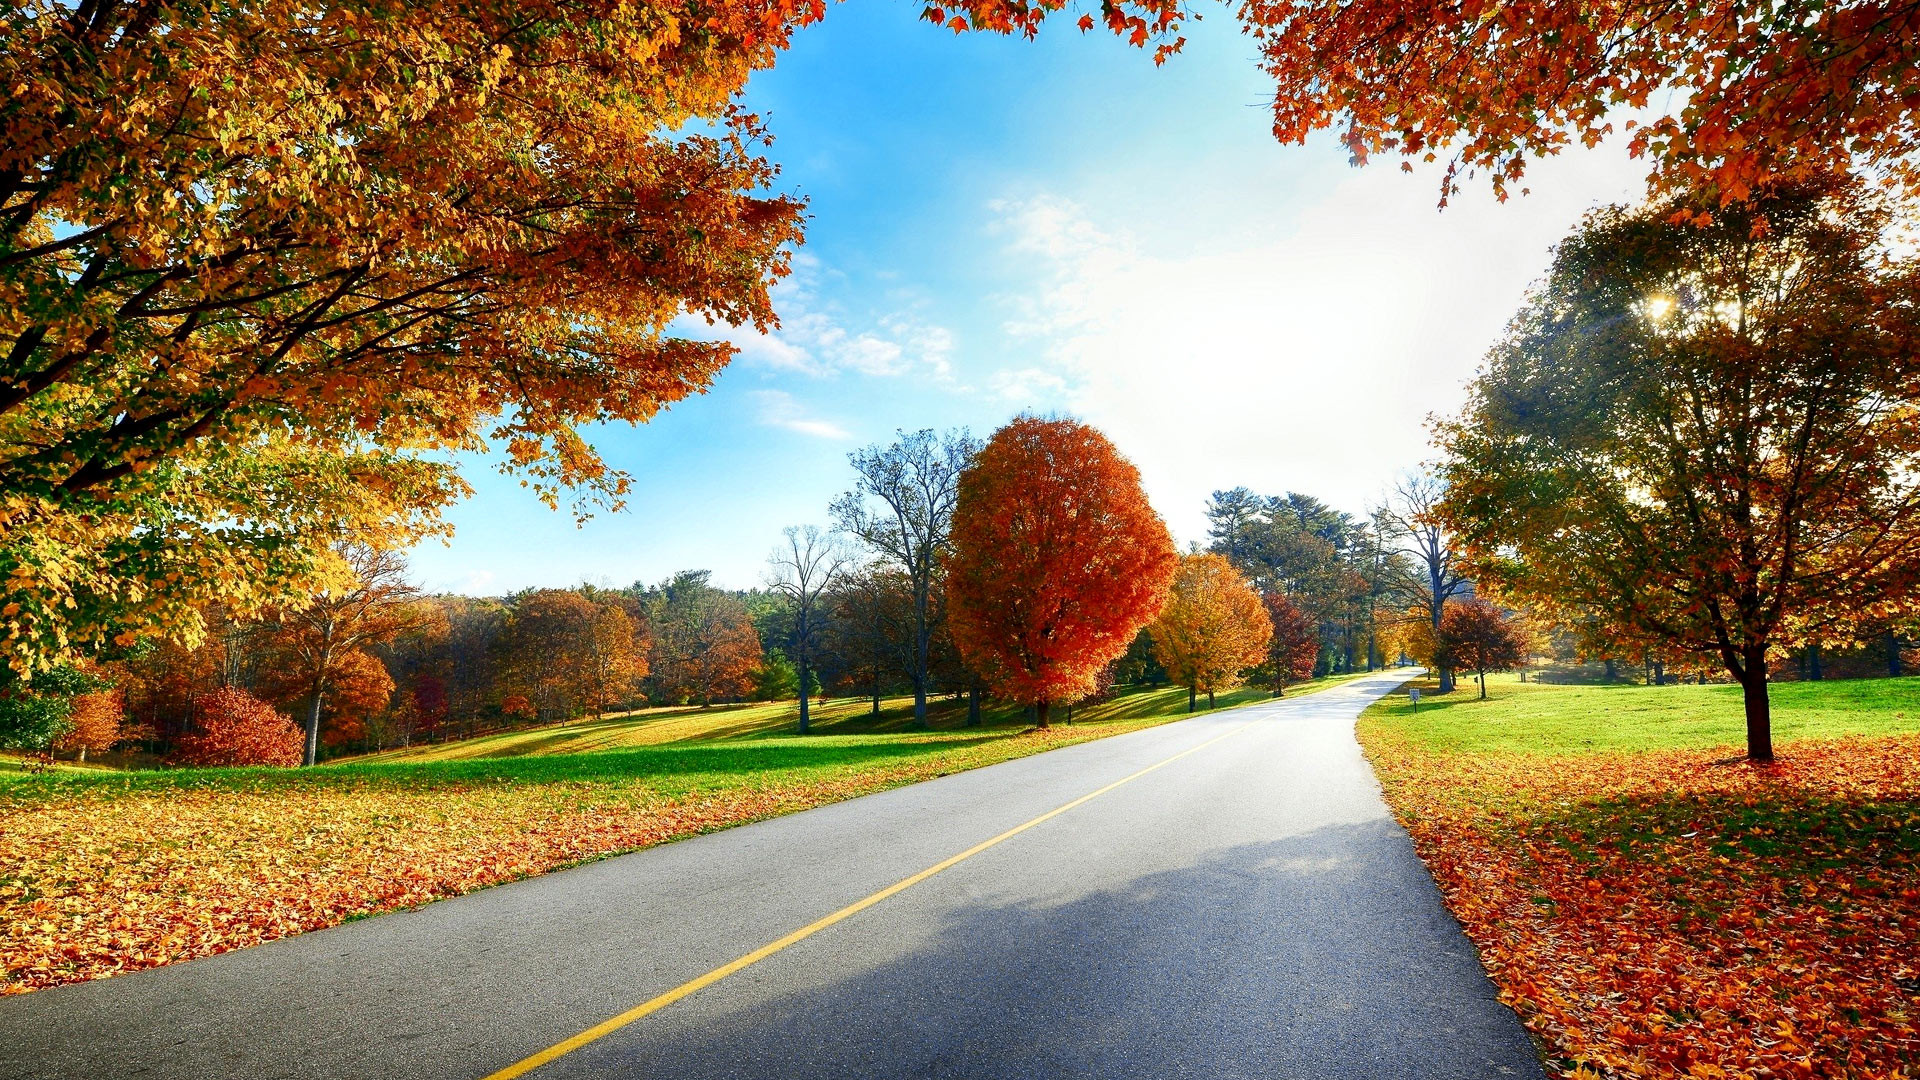 1920x1080 Beautiful autumn road scenery wallpapers – Free full hd wallpapers .